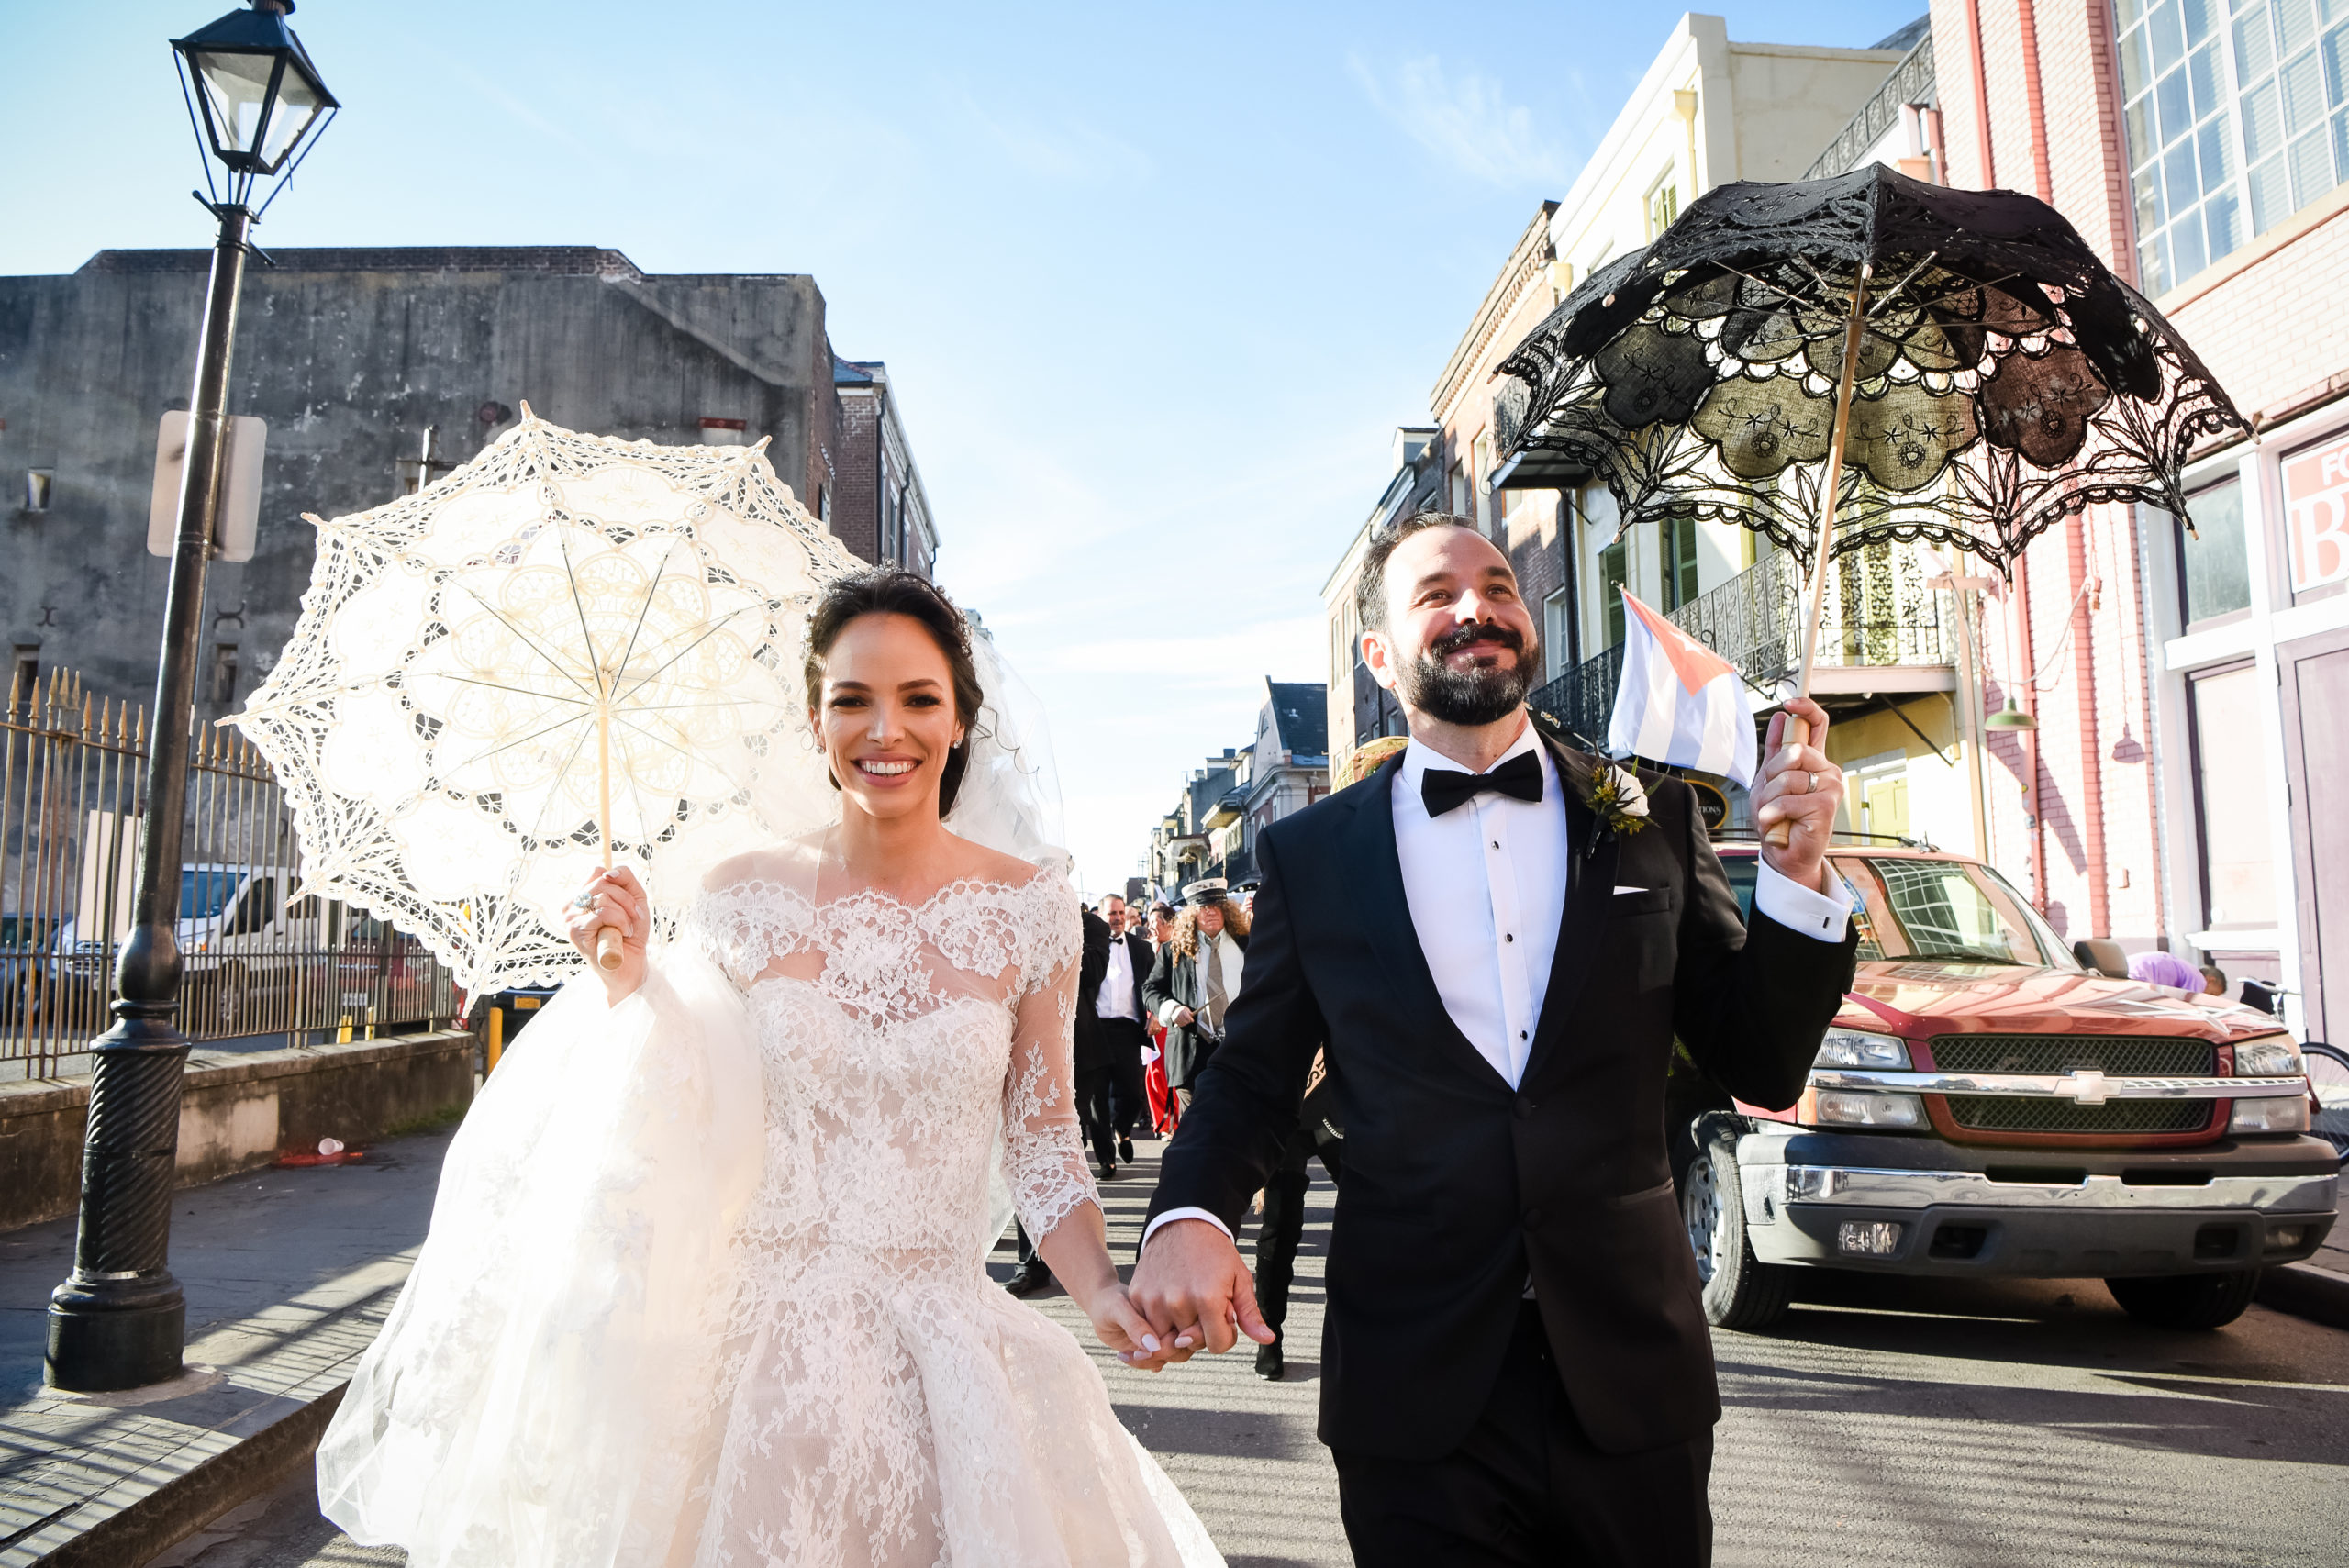 A bride and groom walking down the street